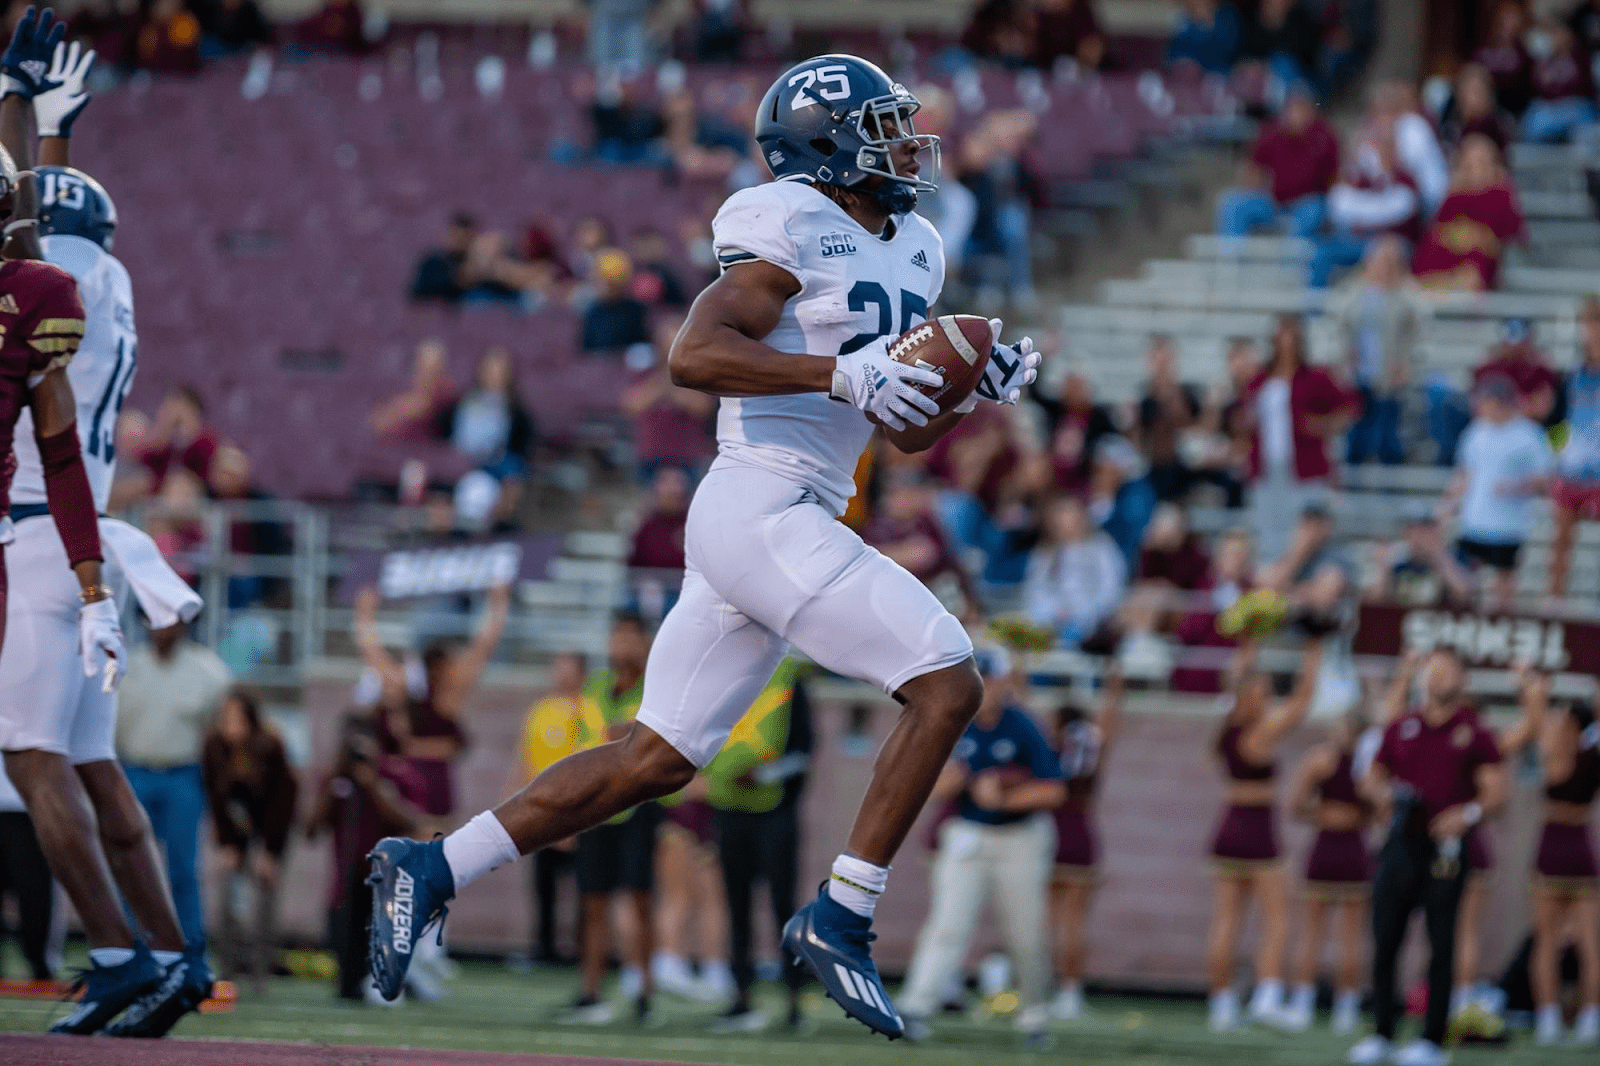 Jalen White is the tough, physical RB at Georgia Southern. He looks to solidify his draft stock with a quality season this fall. Hula Bowl scout Elijah Ballew breaks down White as an NFL Prospect in his report.